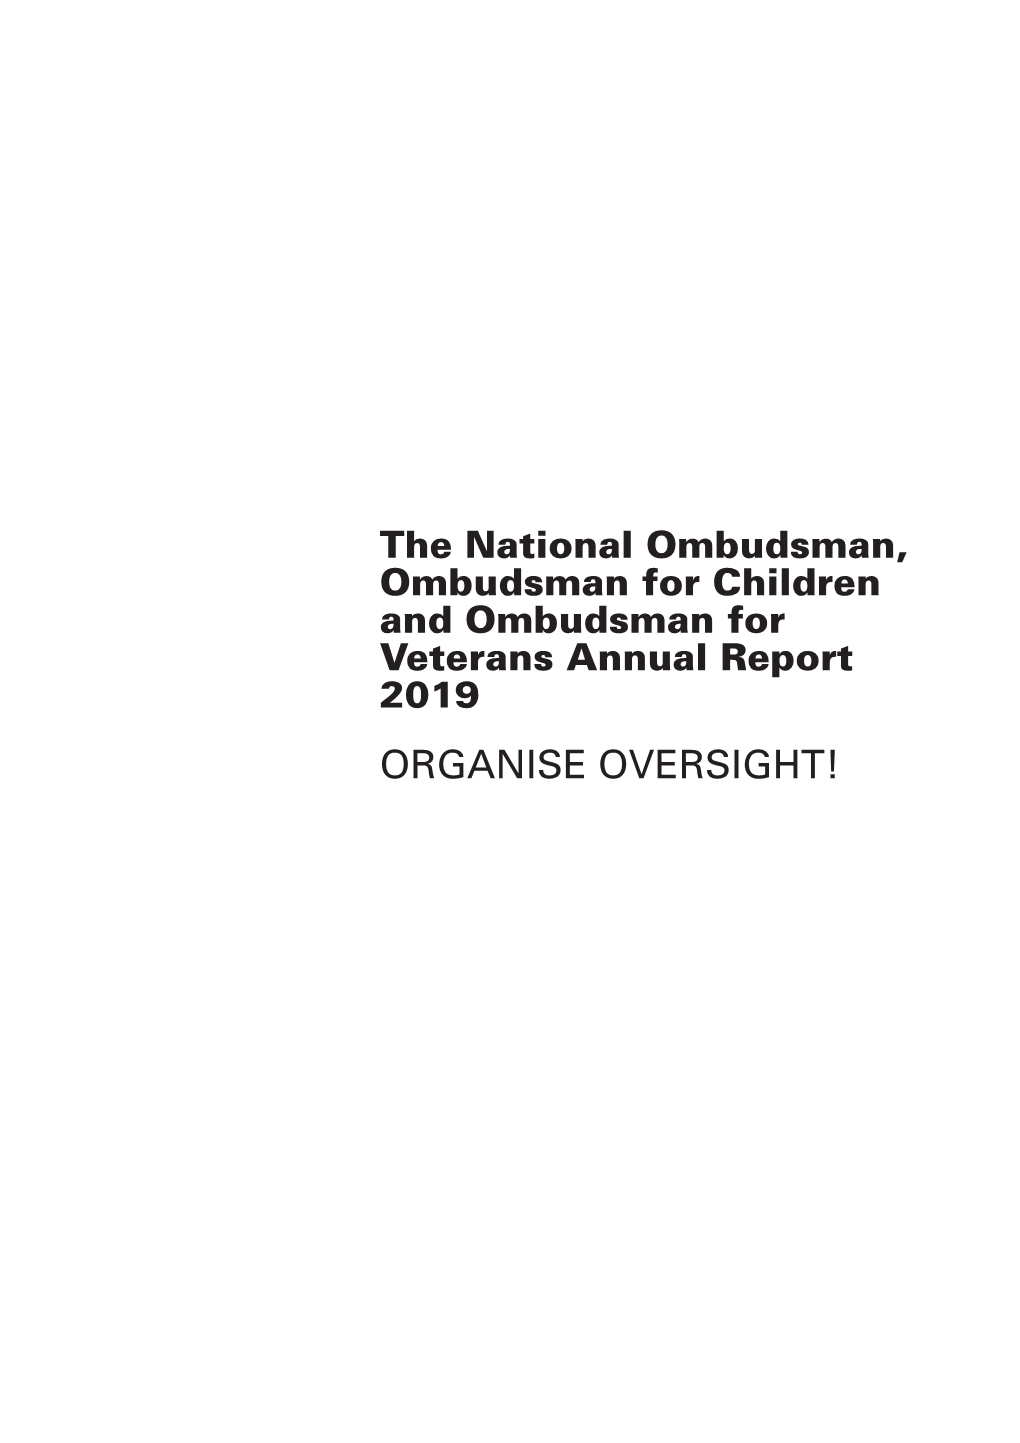 Annual Report 2019 ORGANISE OVERSIGHT! the National Ombudsman, Ombudsman for Children and Ombudsman for Veterans Annual Report 2019 ORGANISE OVERSIGHT!